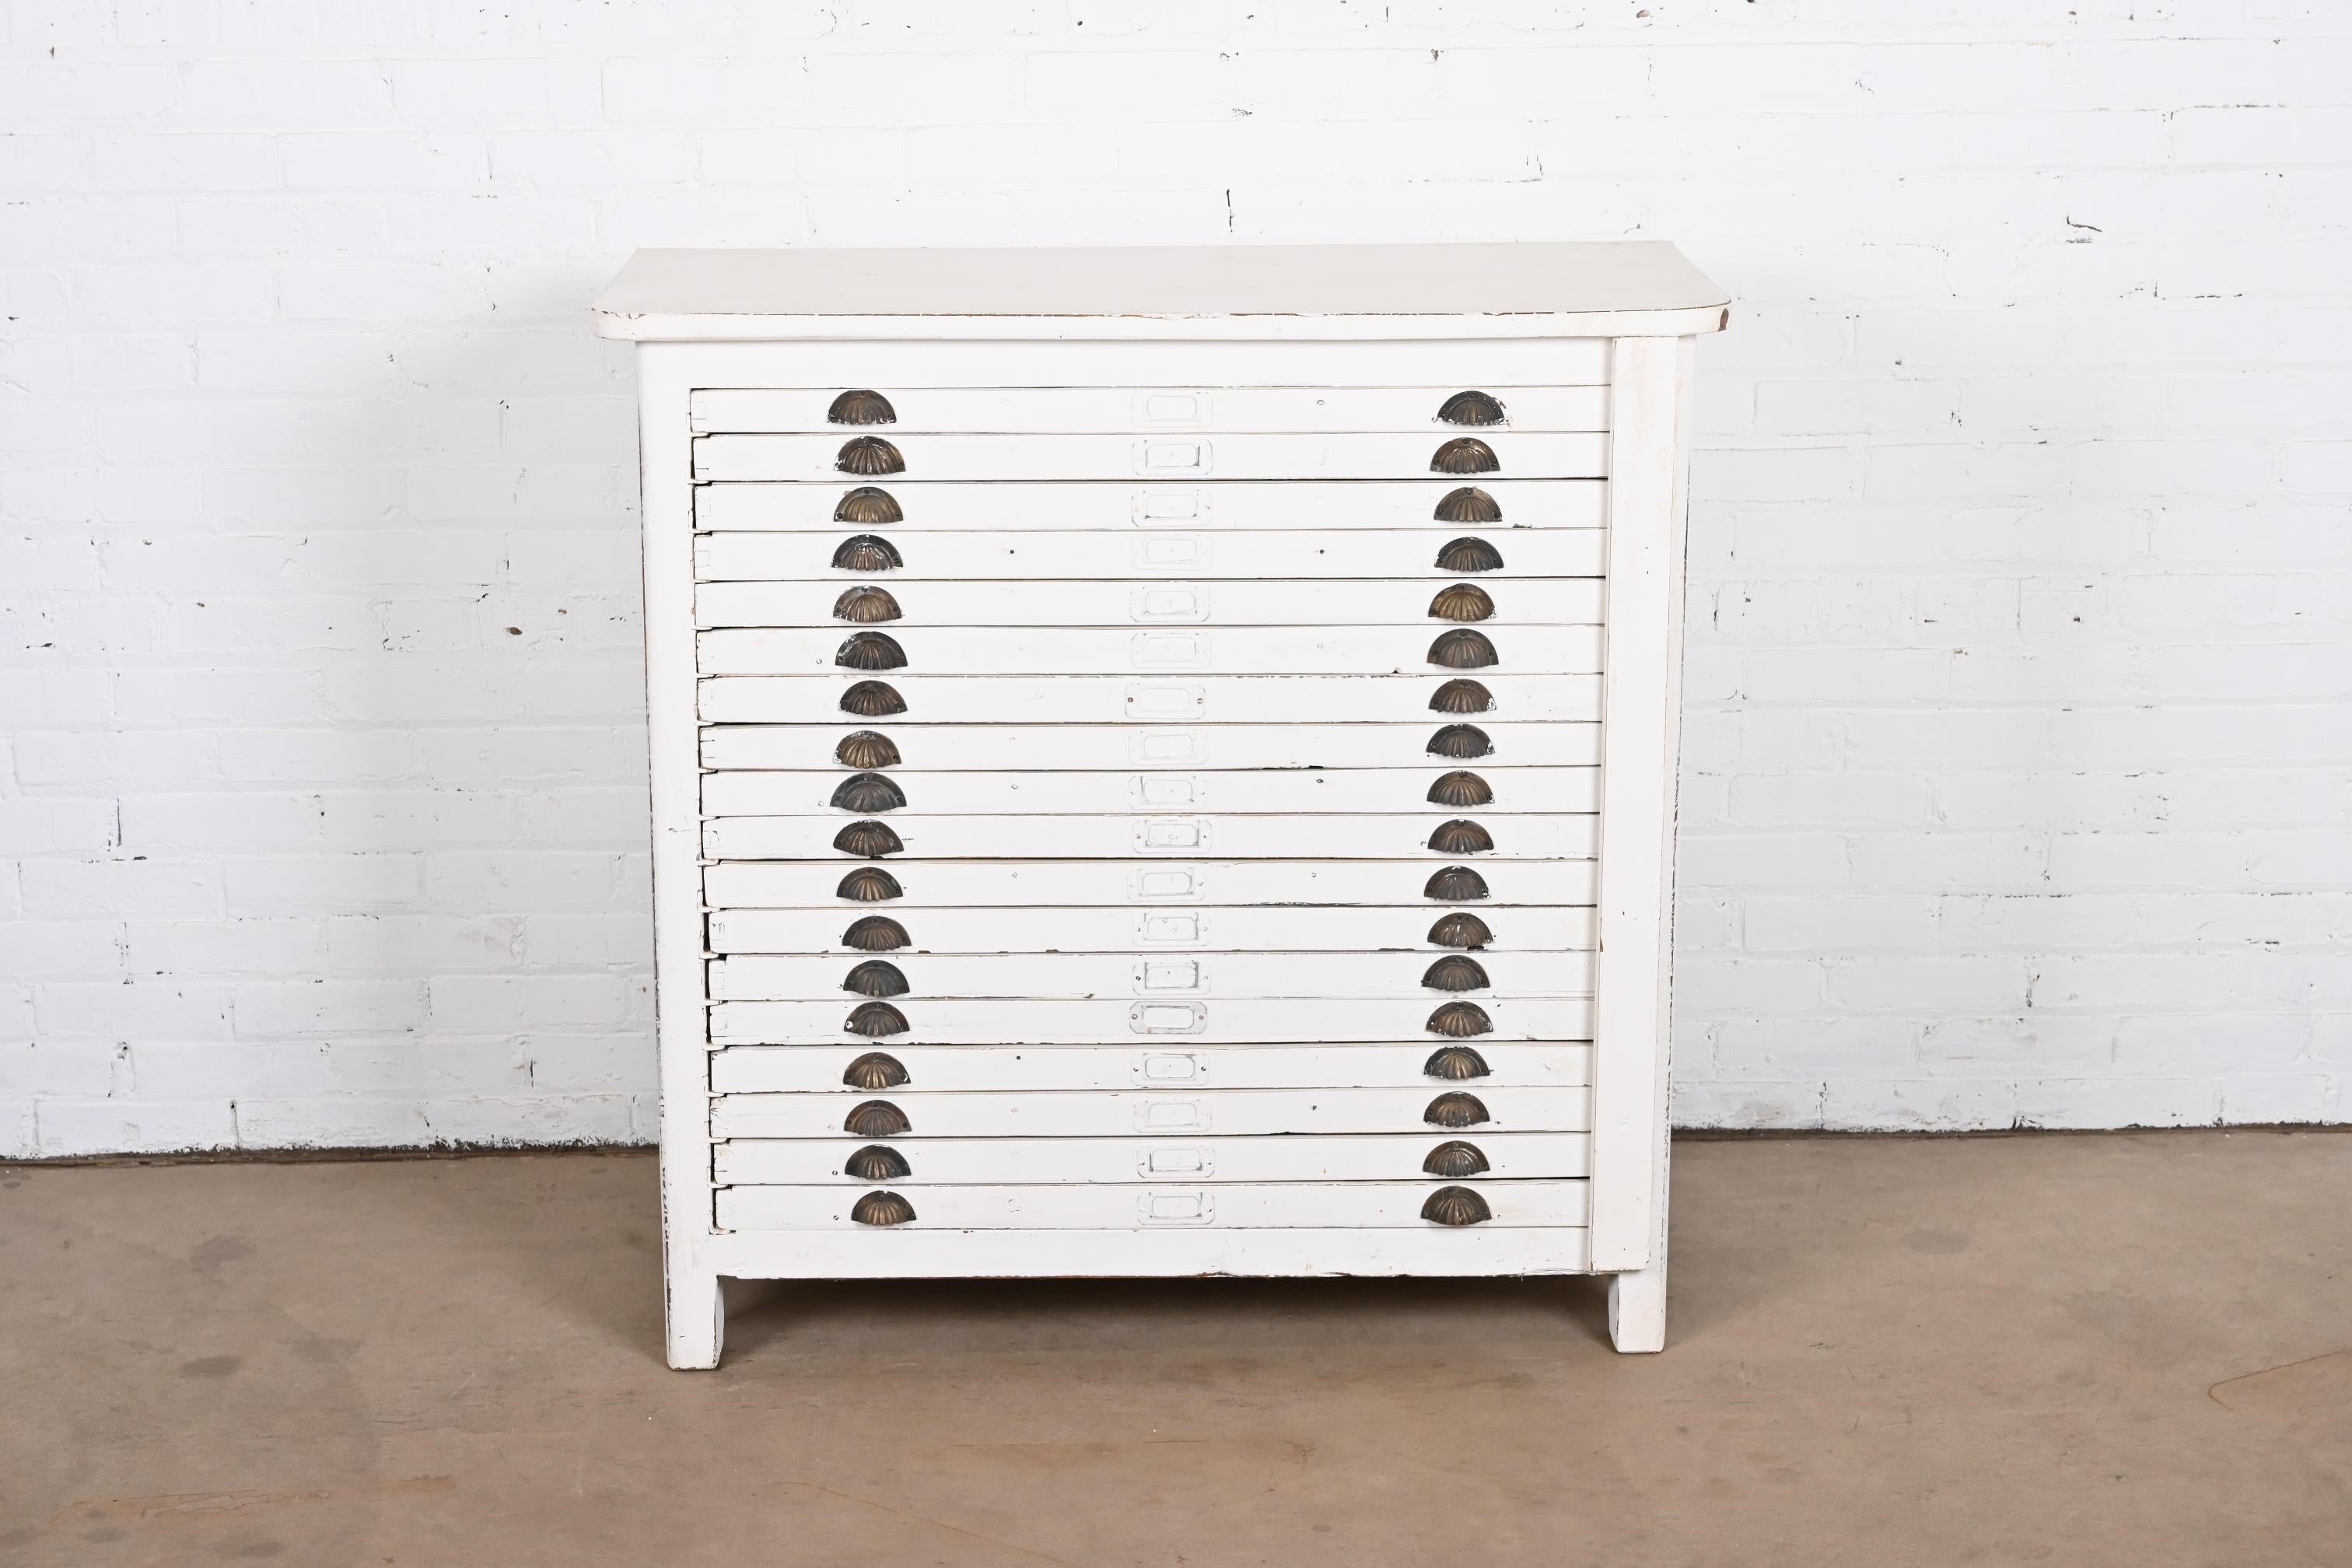 A rare antique primitive Arts & Crafts flat file printer's cabinet

In the manner of Hamilton Manufacturing Co.

USA, Circa 1900

Solid oak in white painted finish, with brass hardware. Eleven drawers with three compartments; four drawers with many